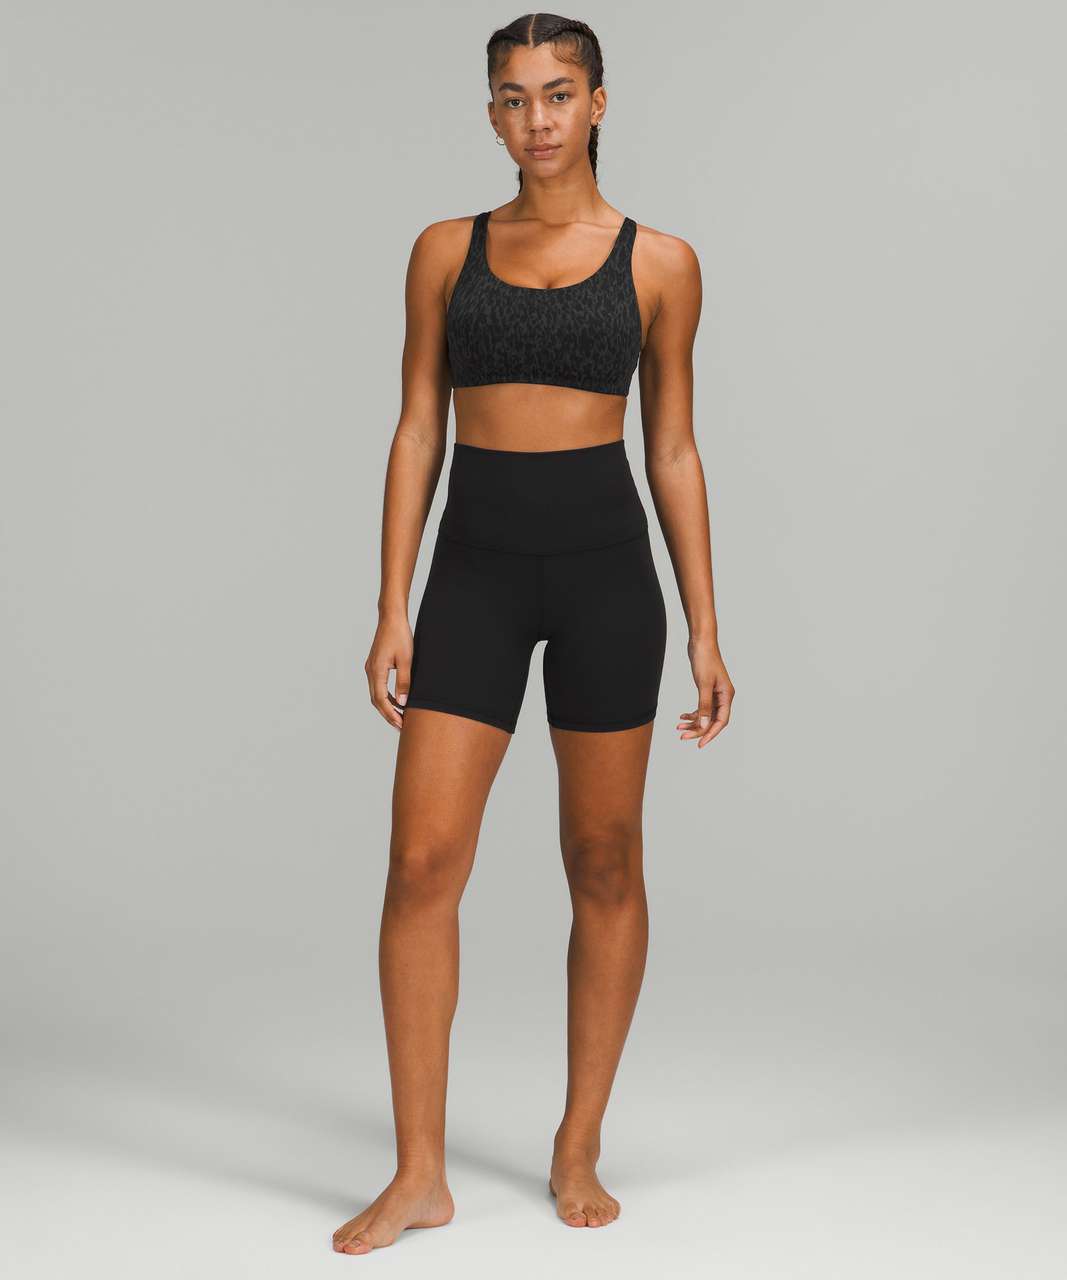 Lululemon Align Bra Reviewed Articles  International Society of Precision  Agriculture